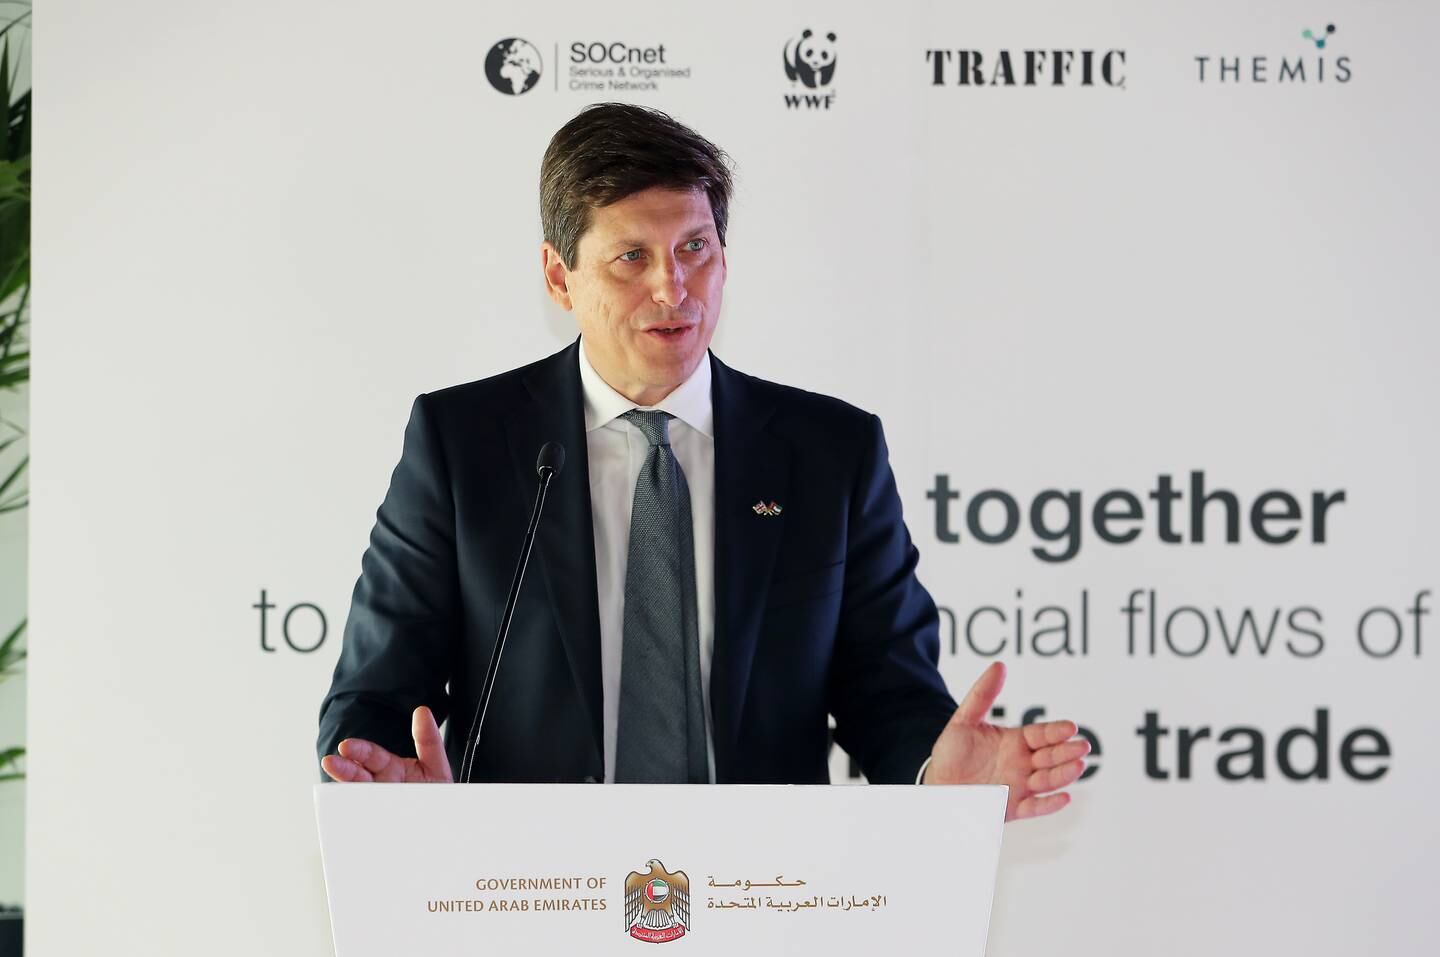 Patrick Moody, UK Ambassador to the UAE, at the Expo 2020 Dubai event to launch the guide. 'Too many animals and species are being consigned to the pages of history by the illegal trade in wildlife,' he said. Pawan Singh / The National  